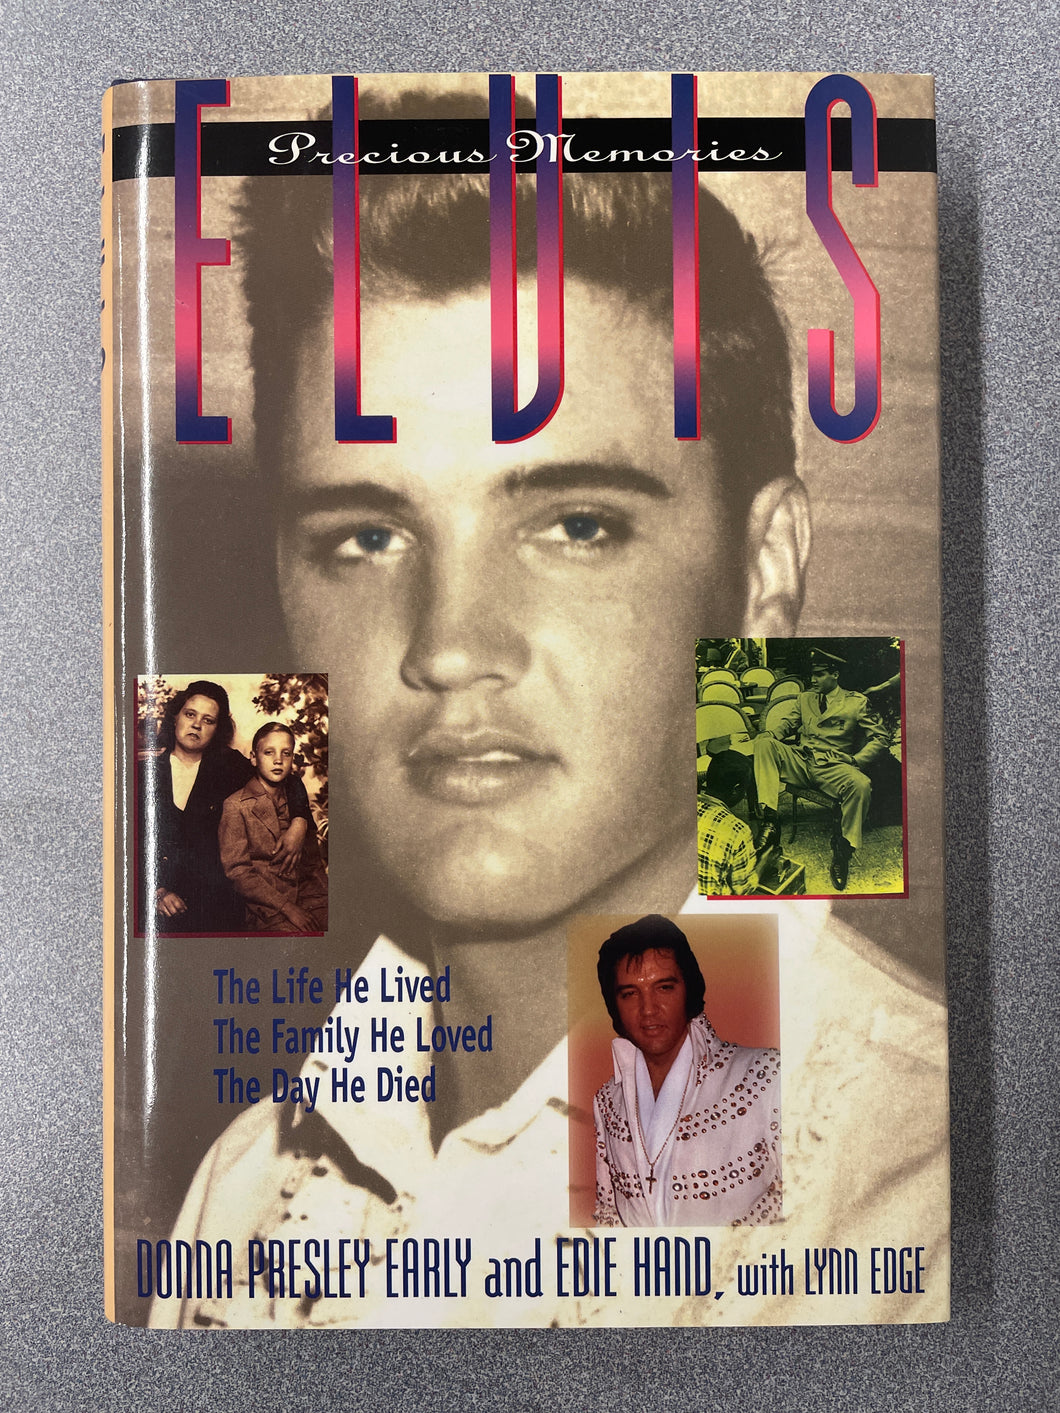 Elvis: Precious Memories, Donna Presley Early and Edie Hand with Lynn Edge [1997] EP, 11/23